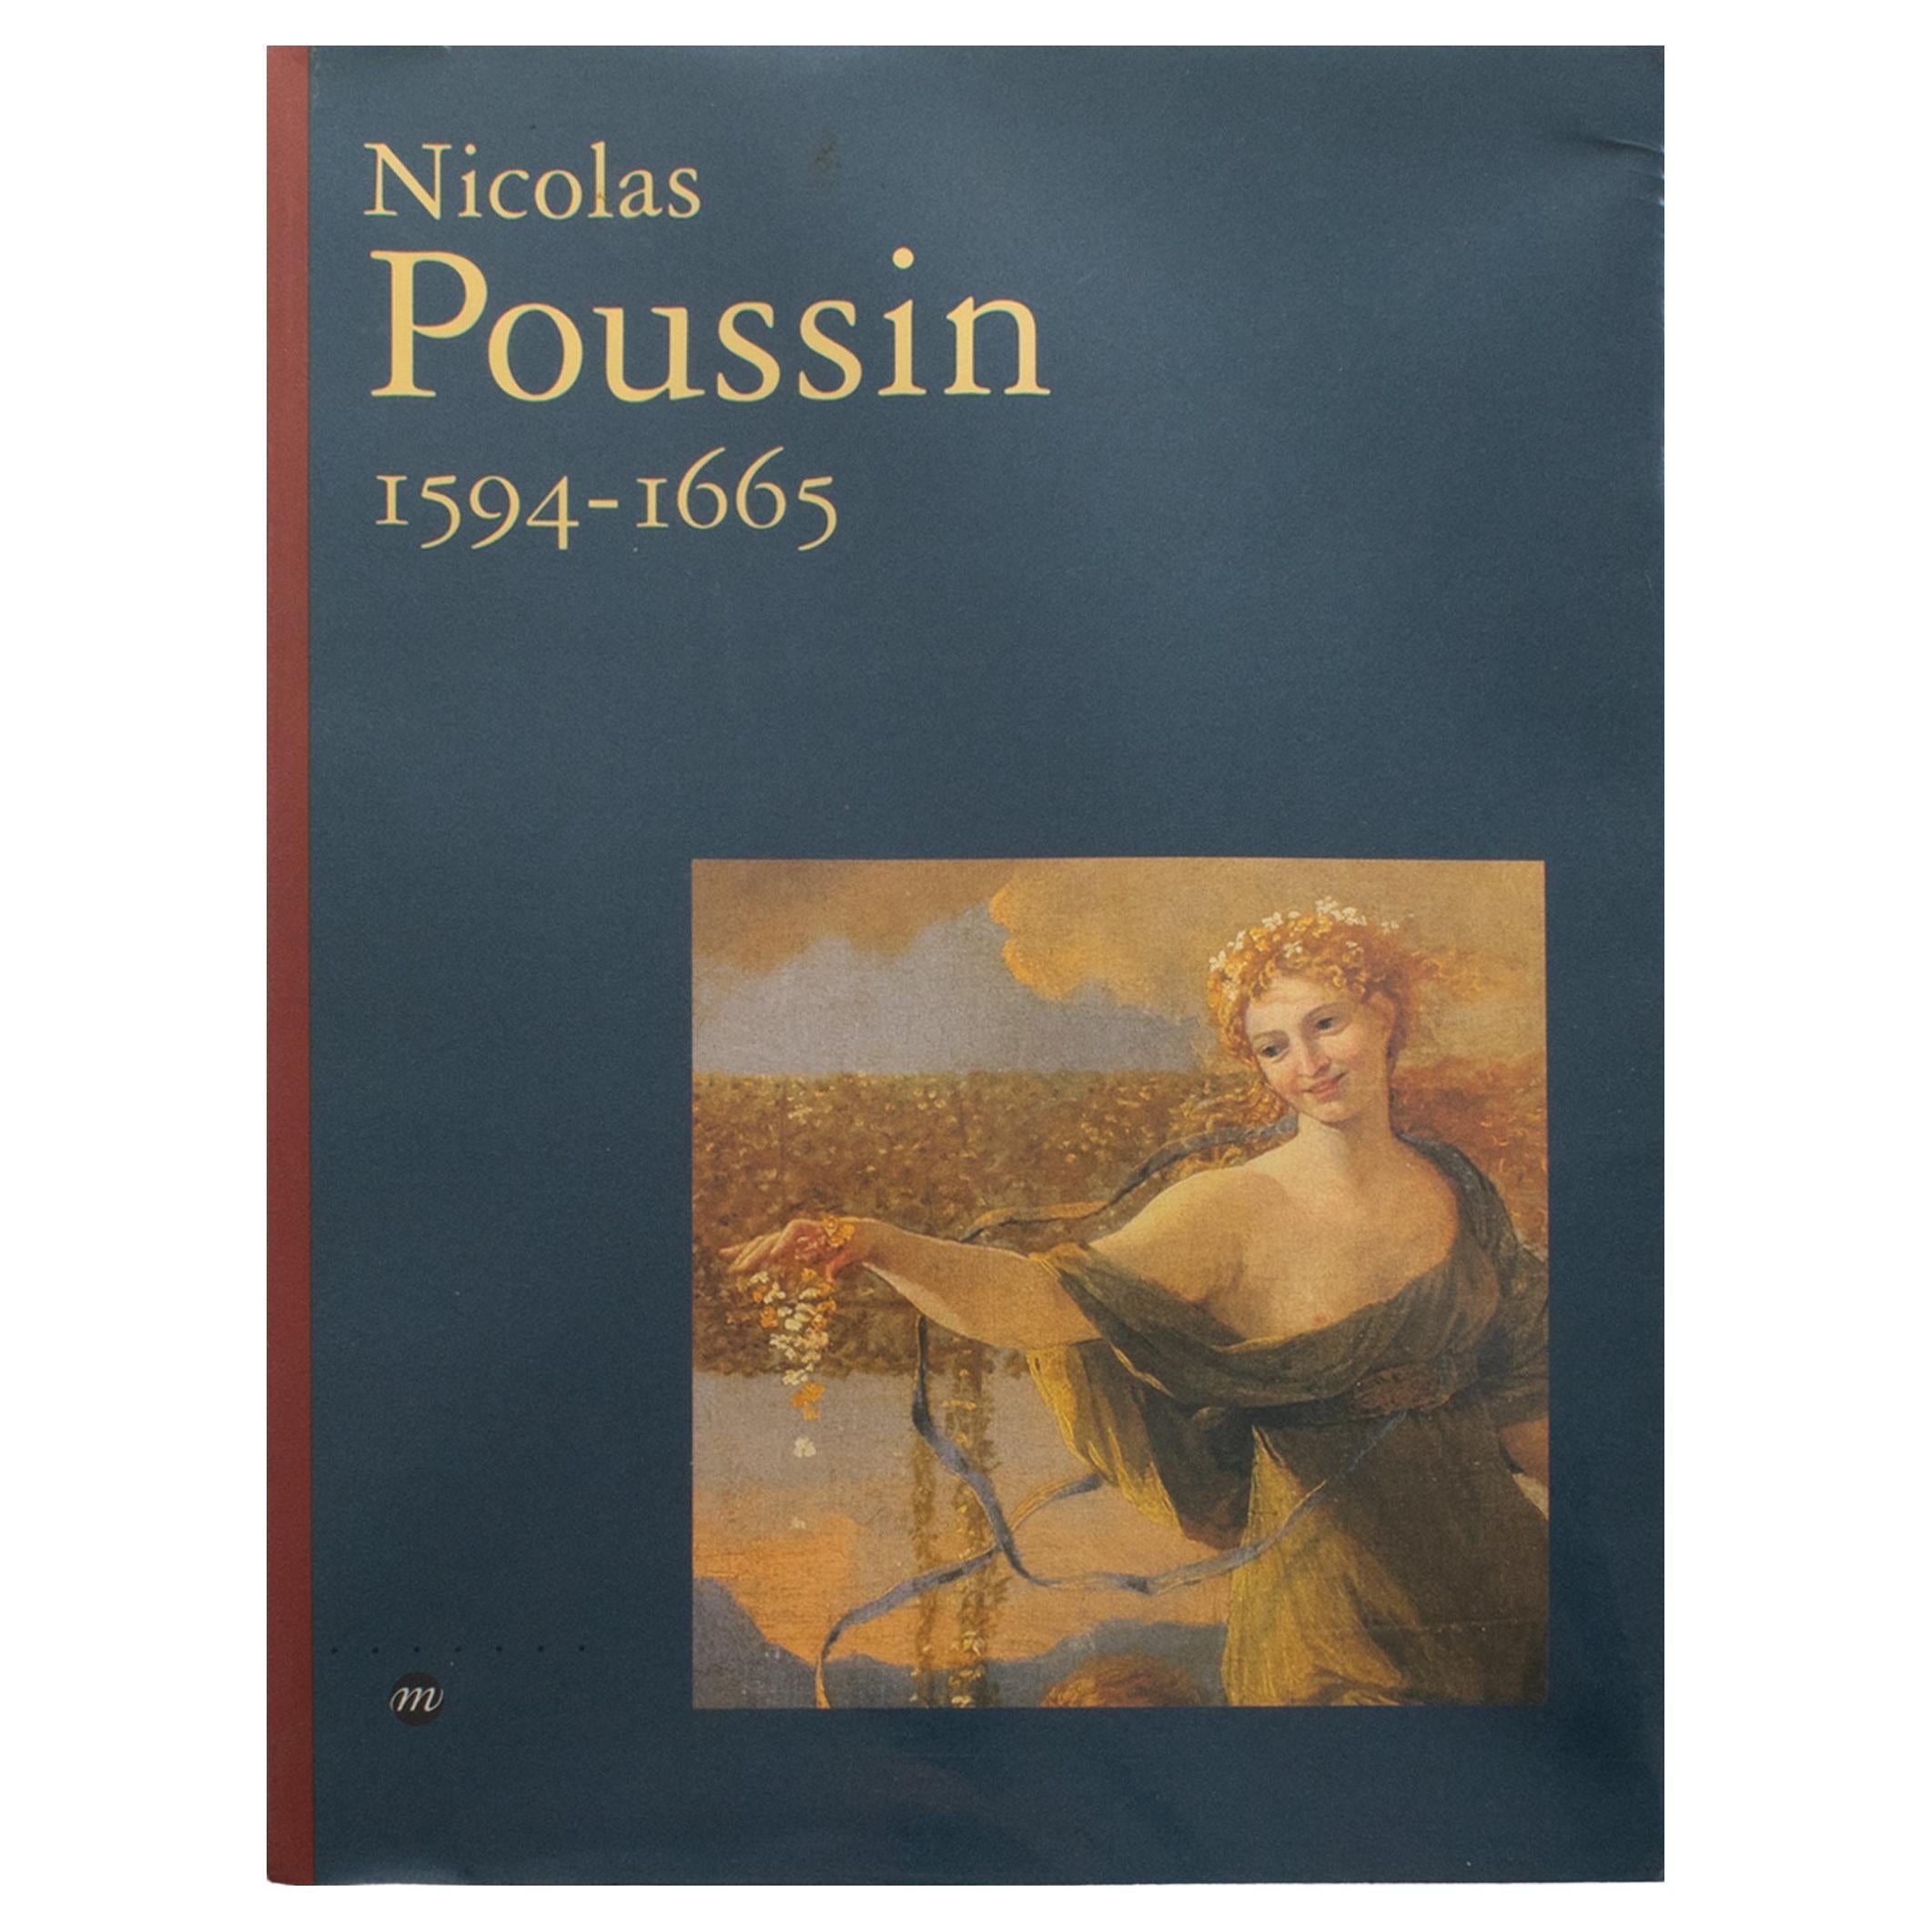 Nicolas Poussin, French Book by Pierre Rosenberg, 1994